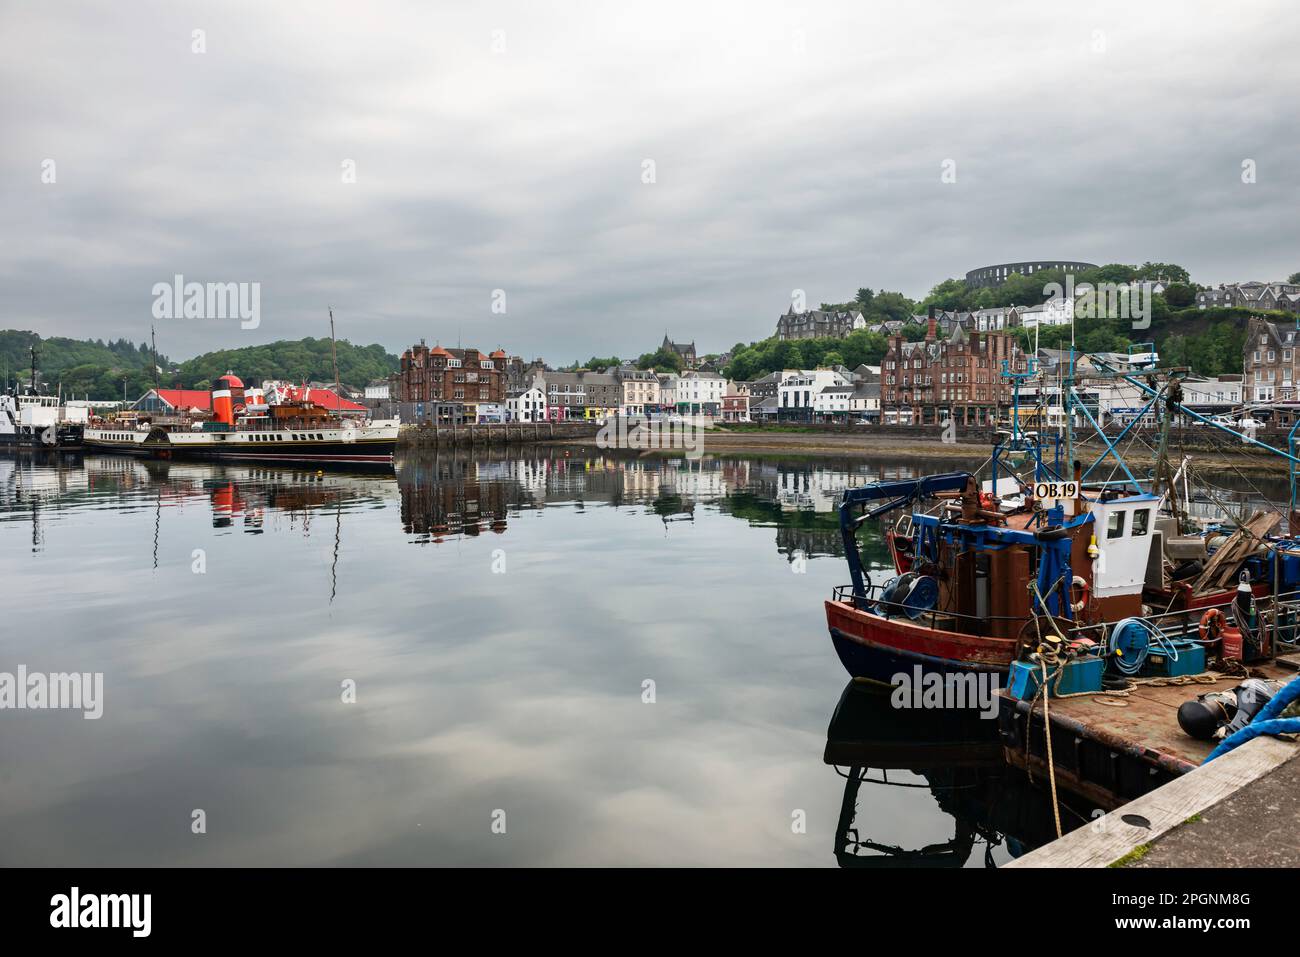 Seagoing Paddle Steamer Waverley moored in Oban Harbour with town and fishing boats Stock Photo